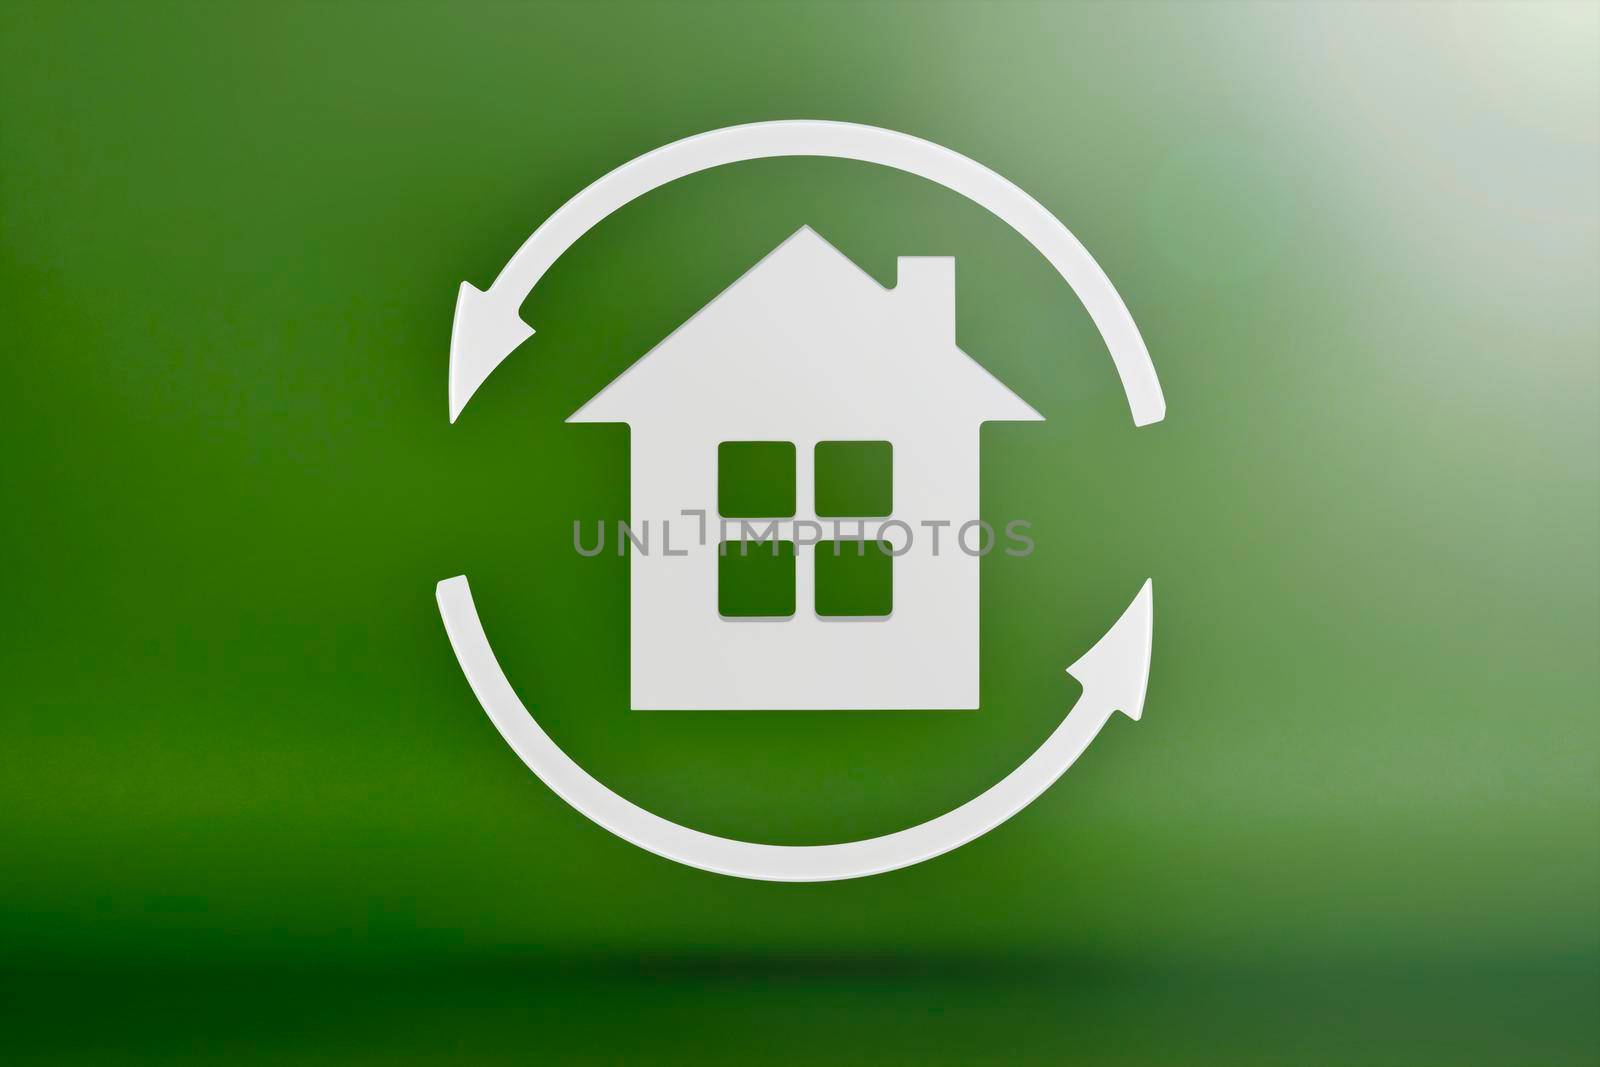 White eco house with recycling symbol, real estate. White house with recycling icon for ecological system. 3D image of a house model on a green background.